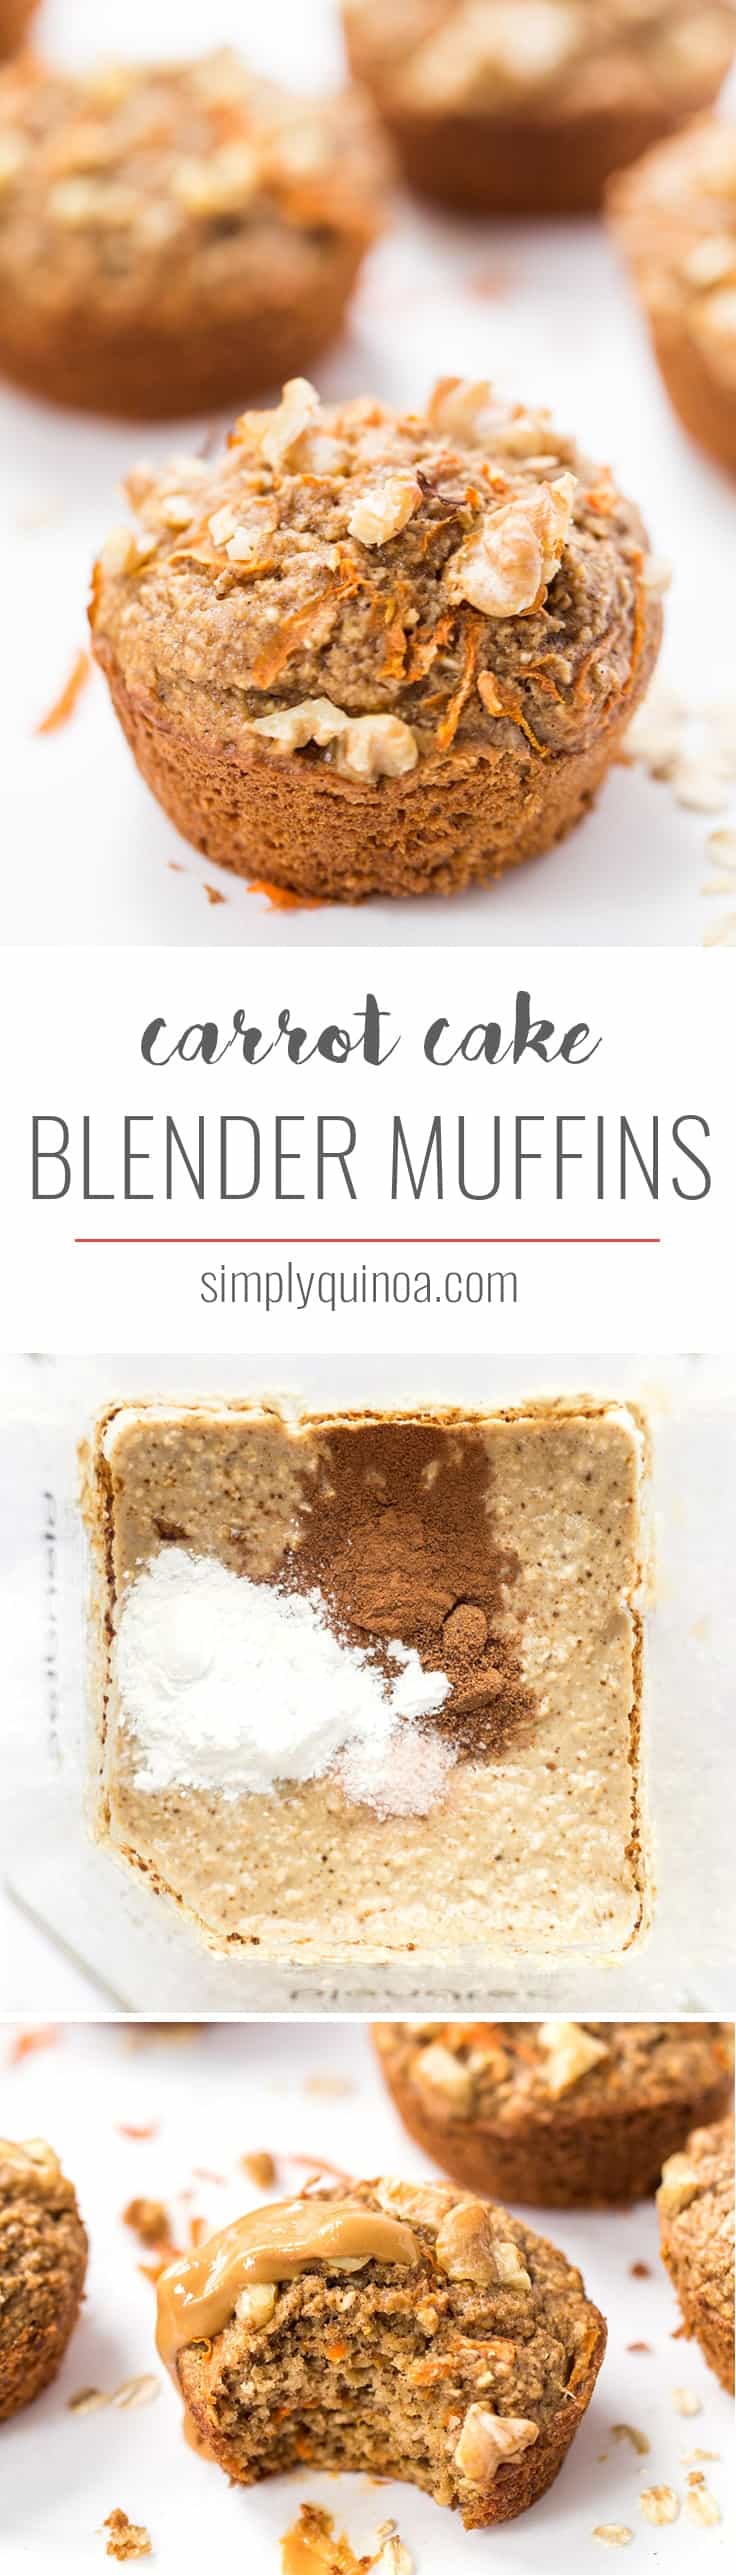 Pull out your blender and whip up these healthy and simple carrot cake blender muffins! Kid-friendly, gluten and dairy-free, and full of fruits and veggies!